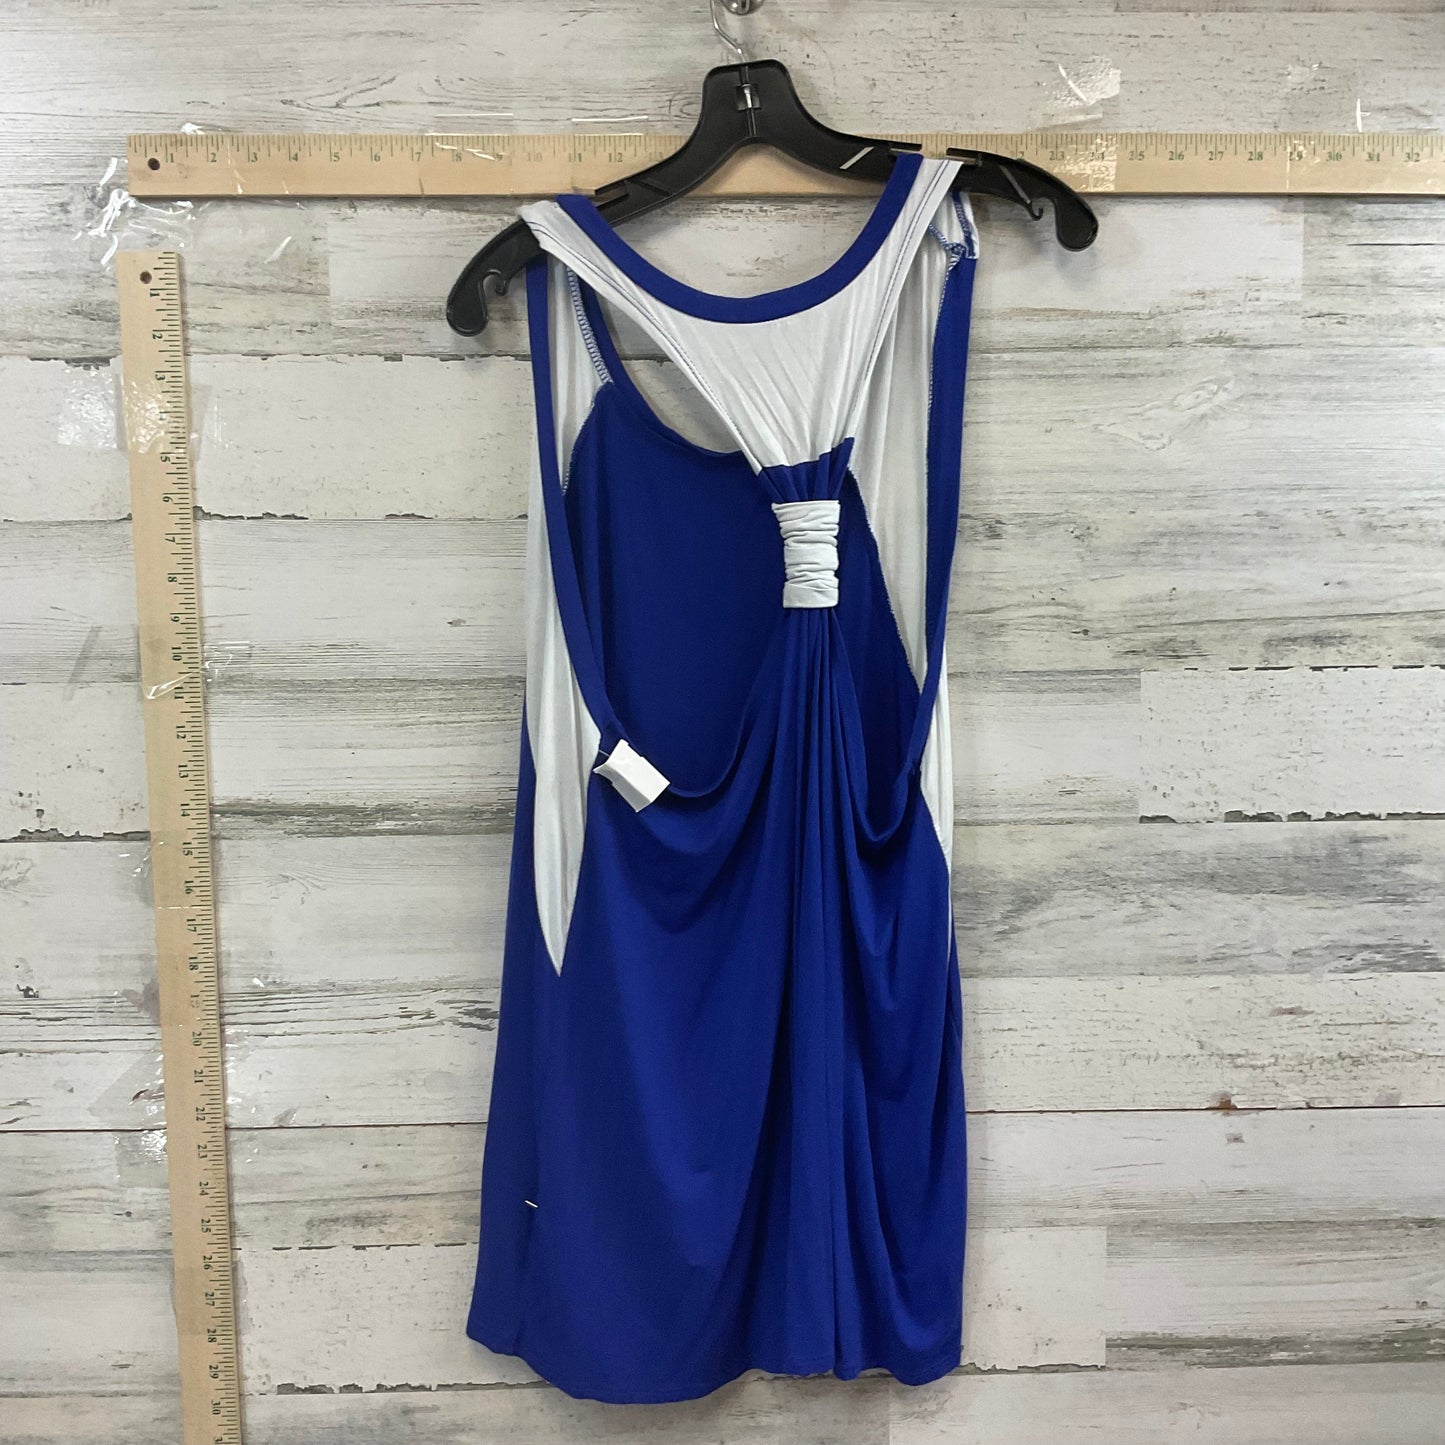 Blue & White Tank Top Sew In Love, Size 2x